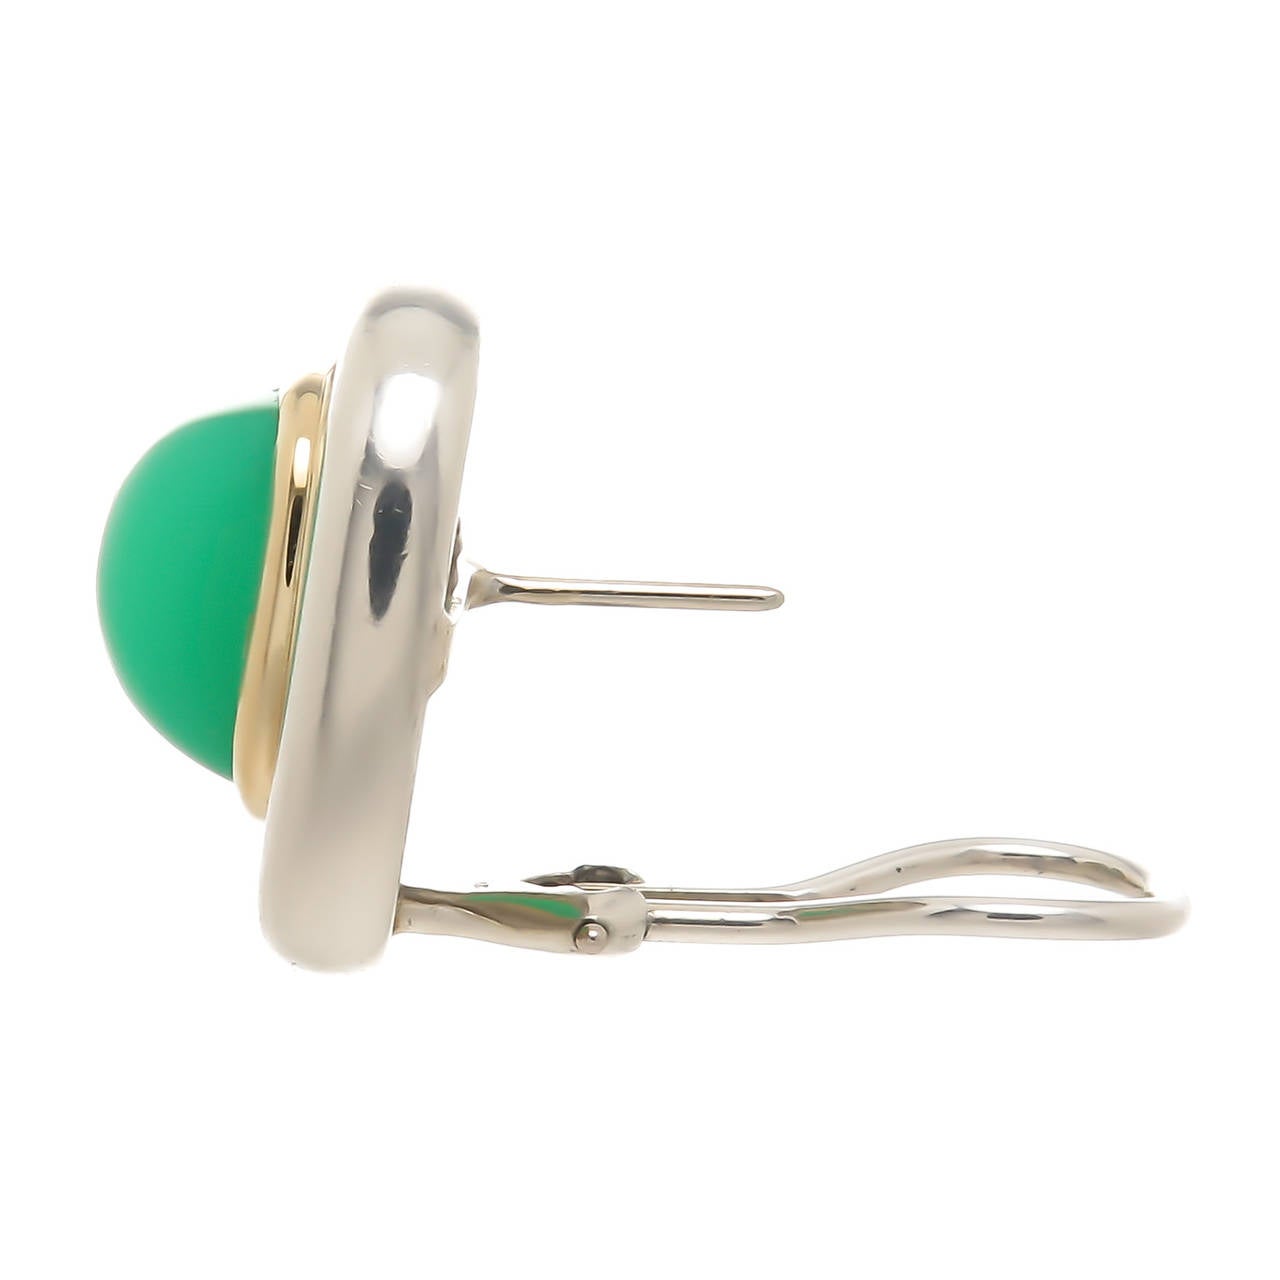 Circa 1980 Paloma Picasso for Tiffany & Company 18K Yellow Gold, Sterling Silver and Chrysoprase Earrings, centrally set with a domed fine Green Chrysoprase surrounded by a frame of Yellow Gold and set in sterling silver. Measuring 3/4  X  3/4 Inch.